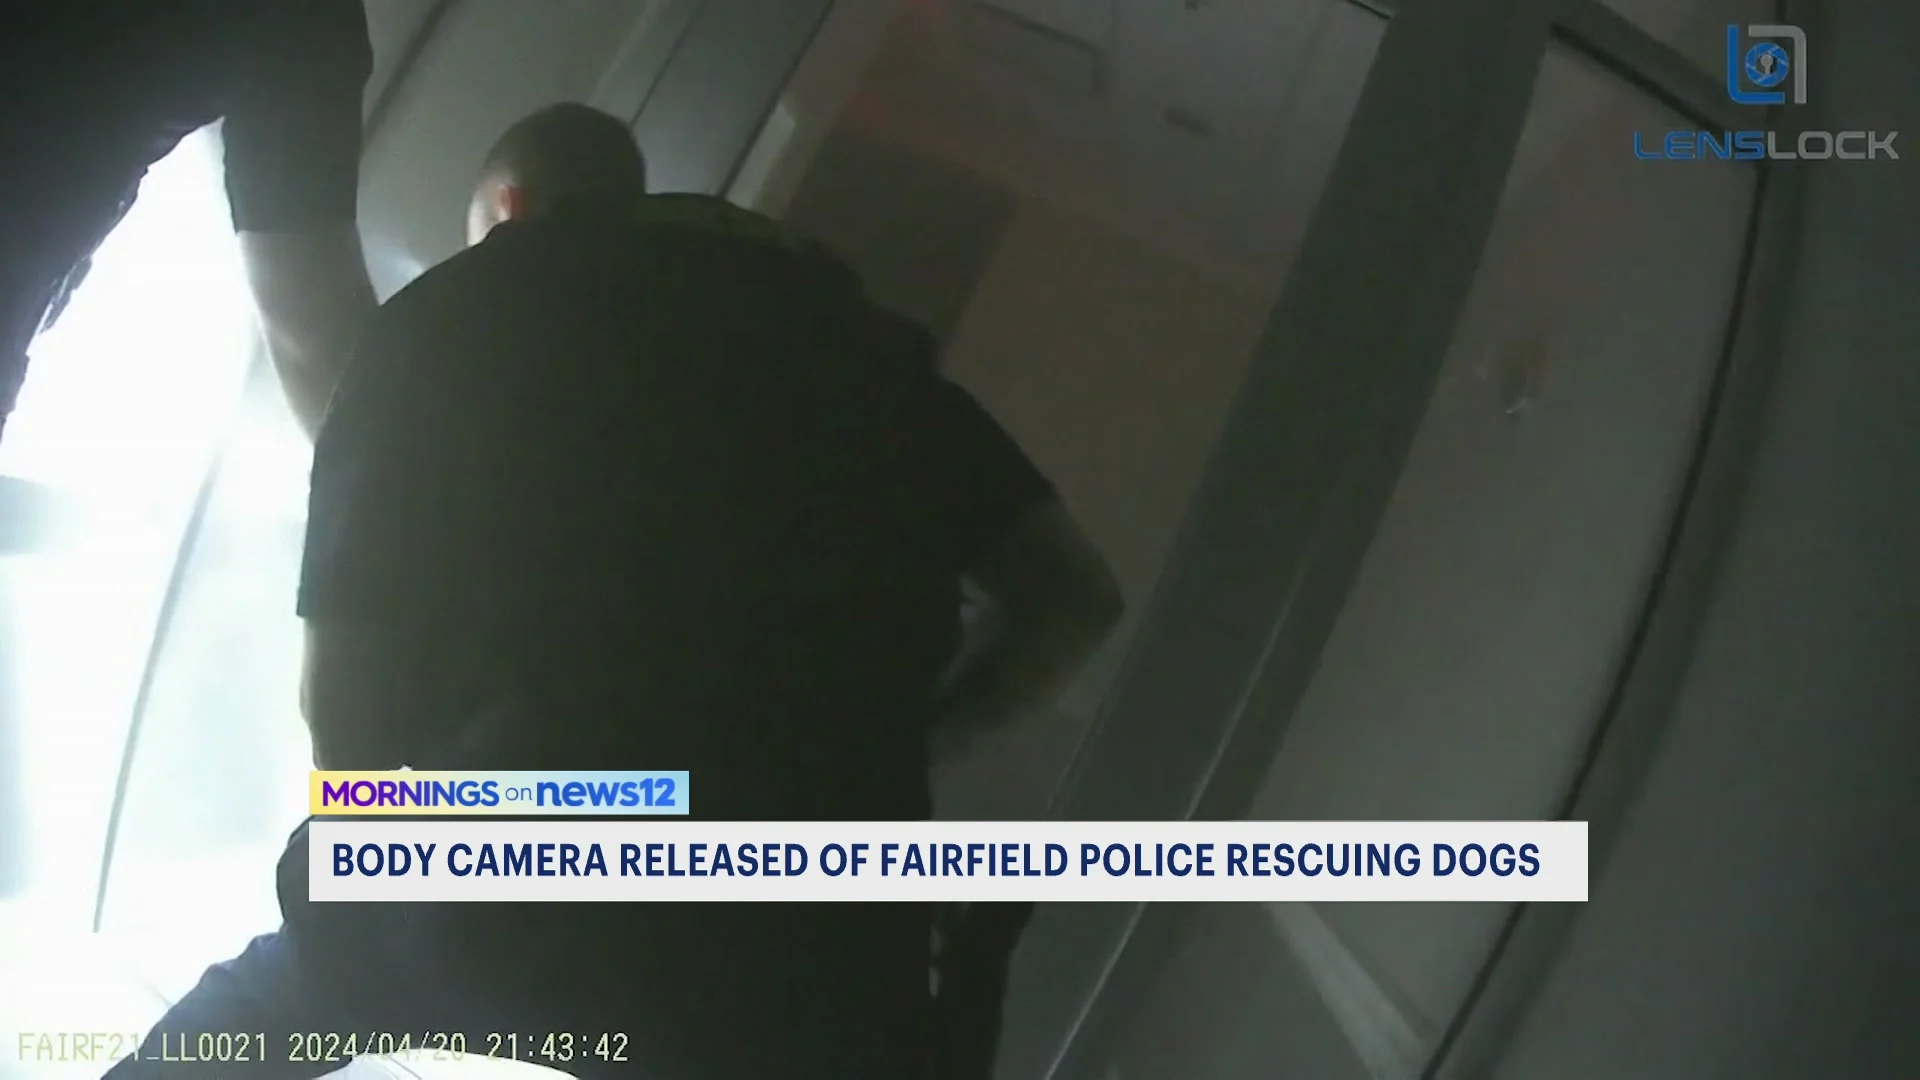 Police body camera footage captures officers rescuing dogs at Fairfield business complex